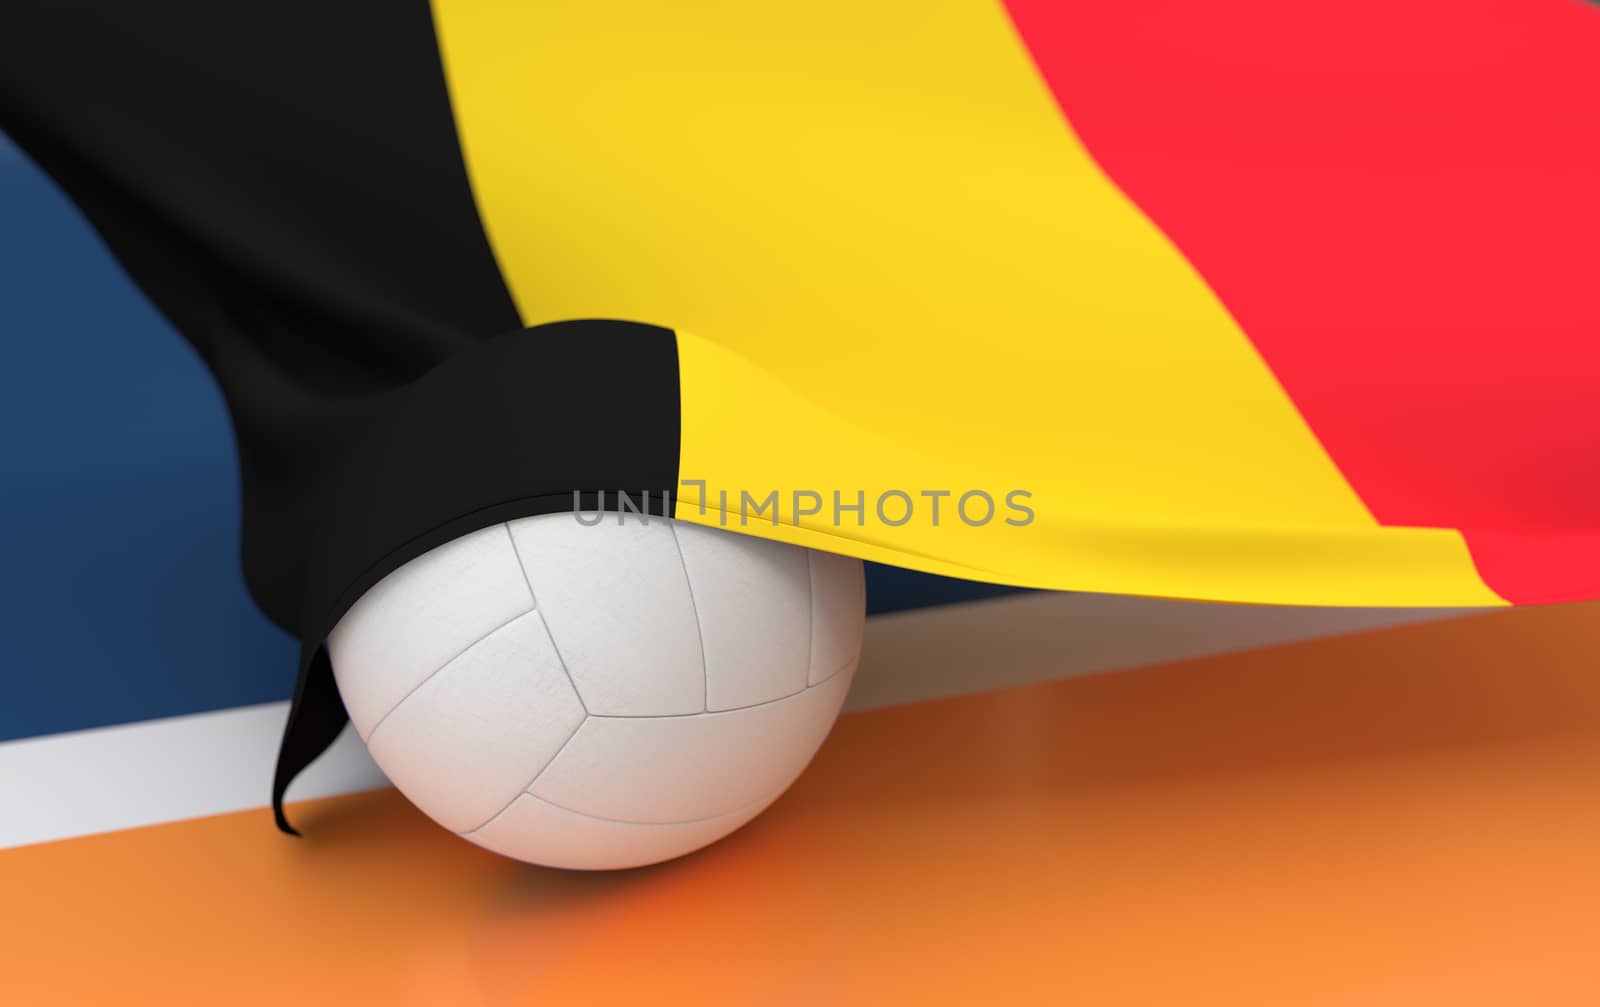 Flag of Belgium with championship volleyball ball by Barbraford